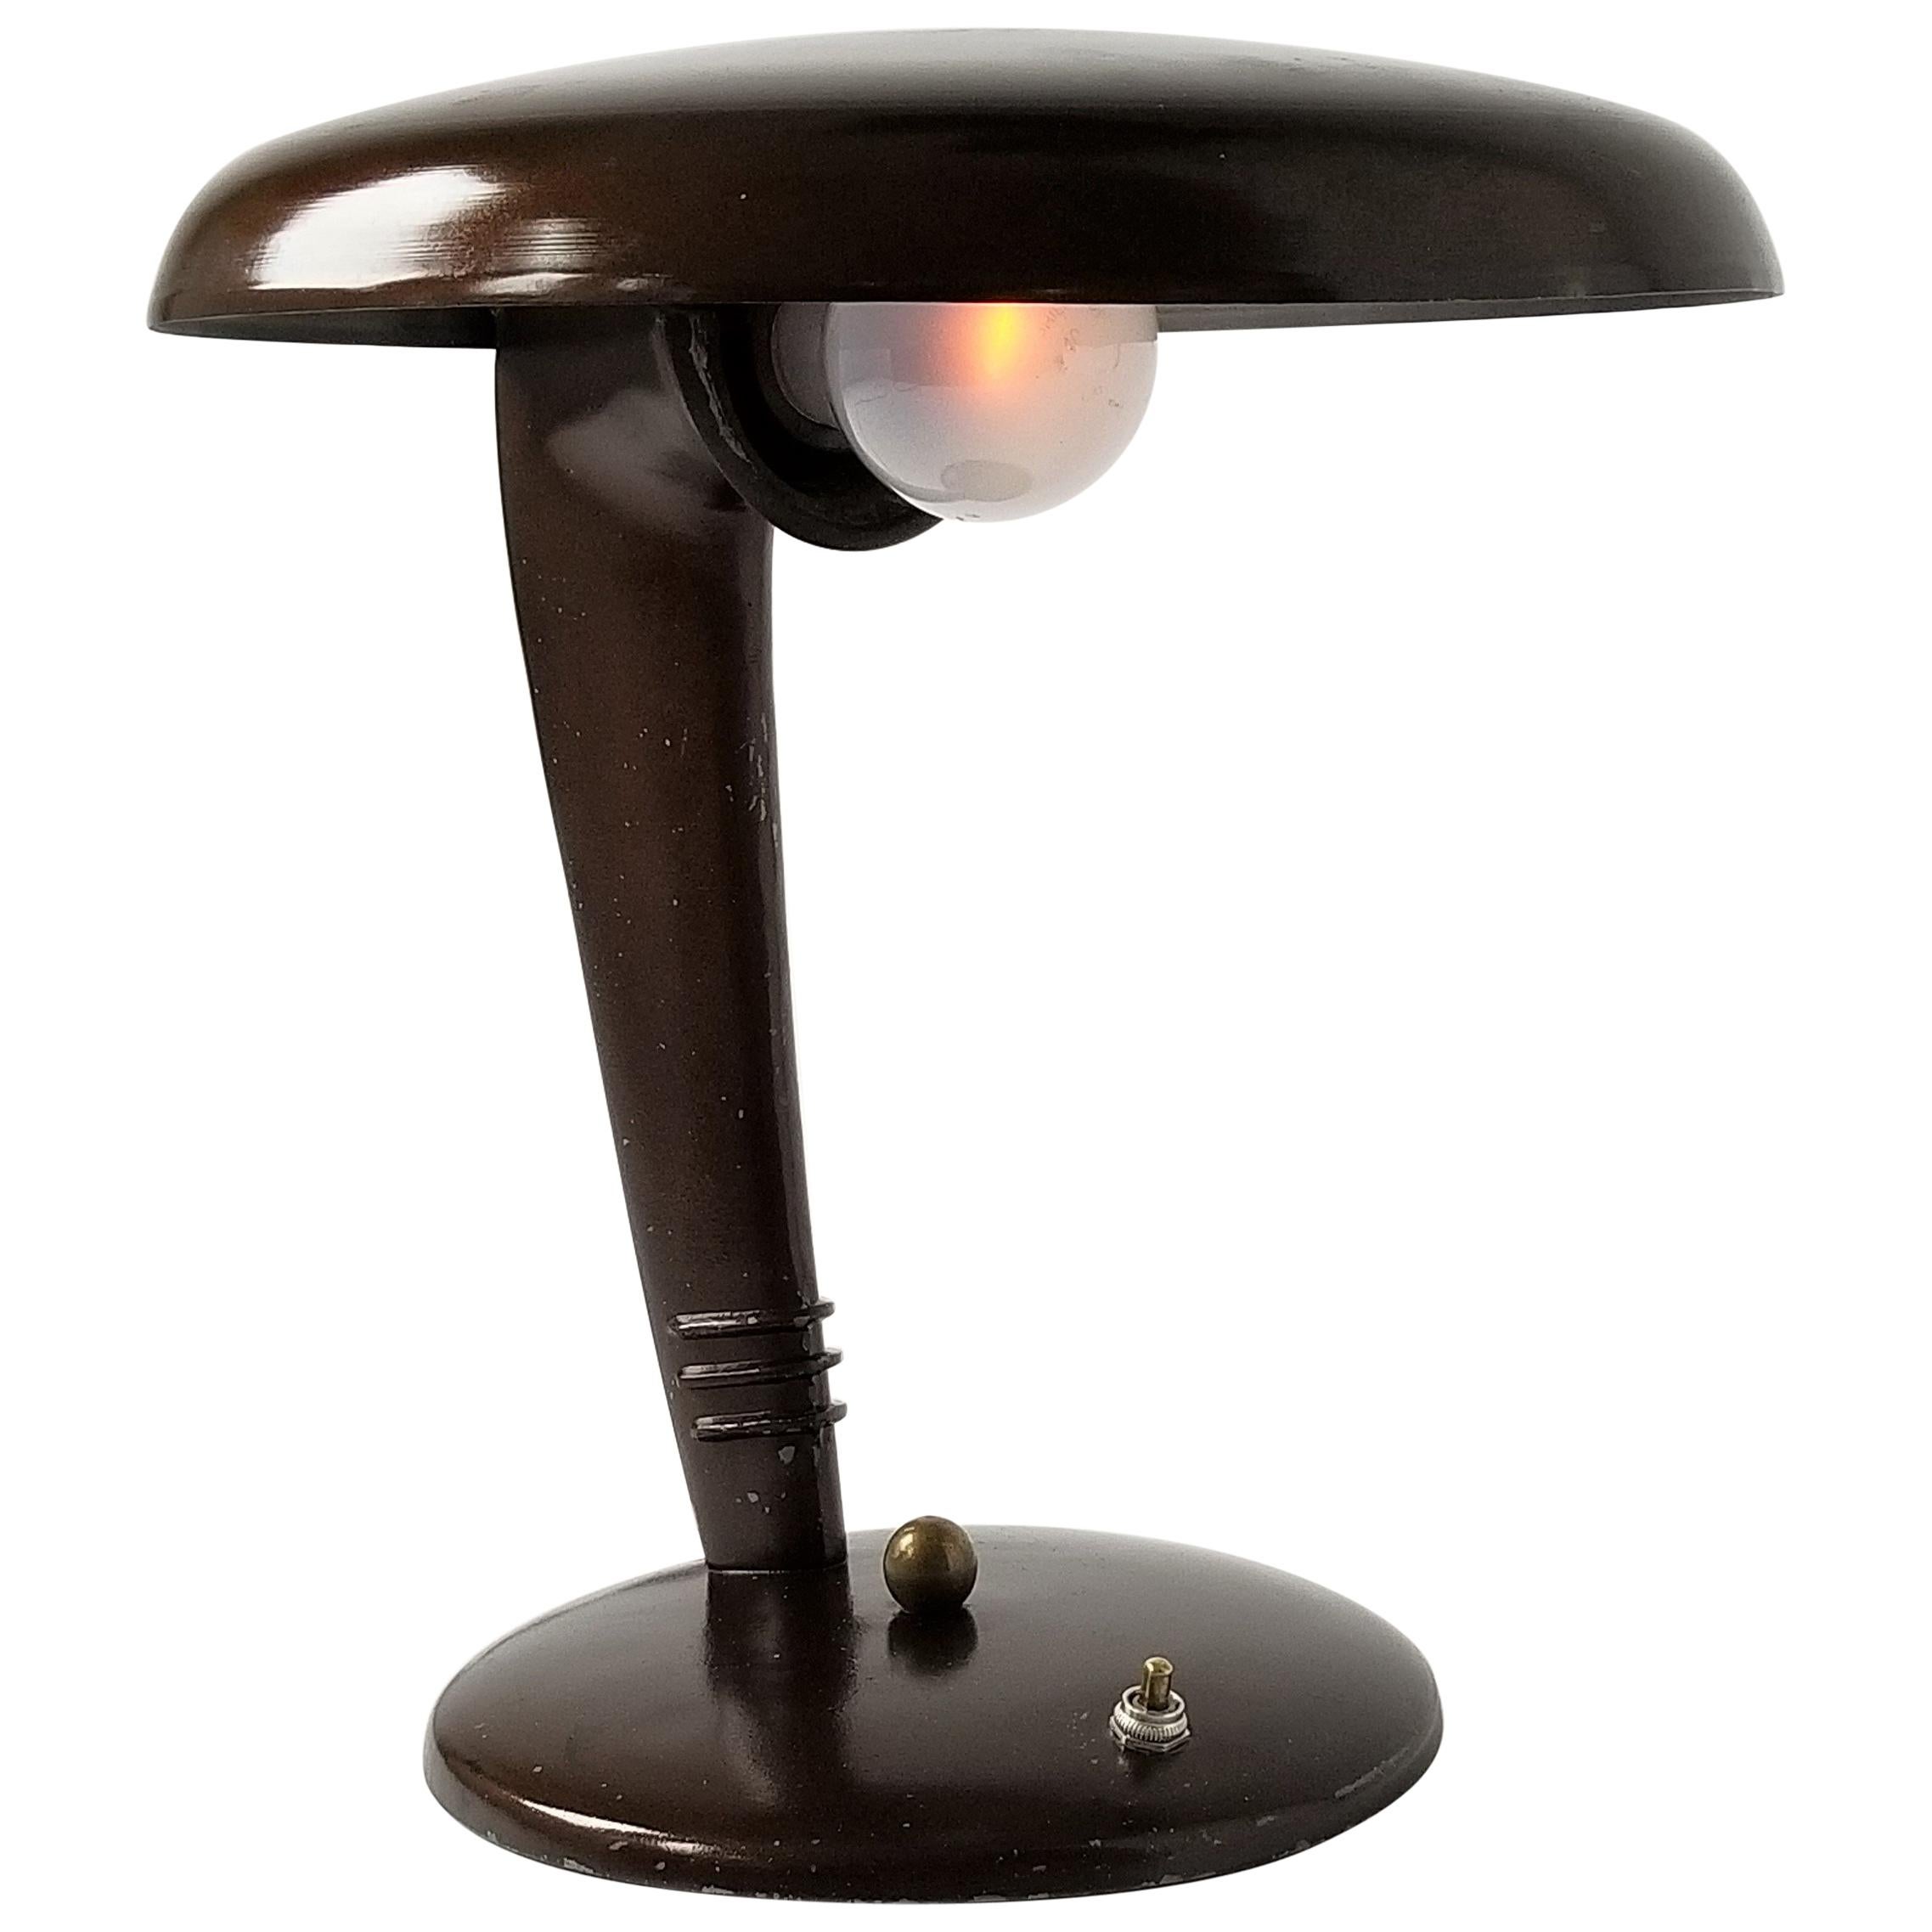 Iconic streamline table lamp made of enameled casted and spun steel. 

In a dark brown cooperish tone.

Regular E26 light bulb rated at 100 watt.